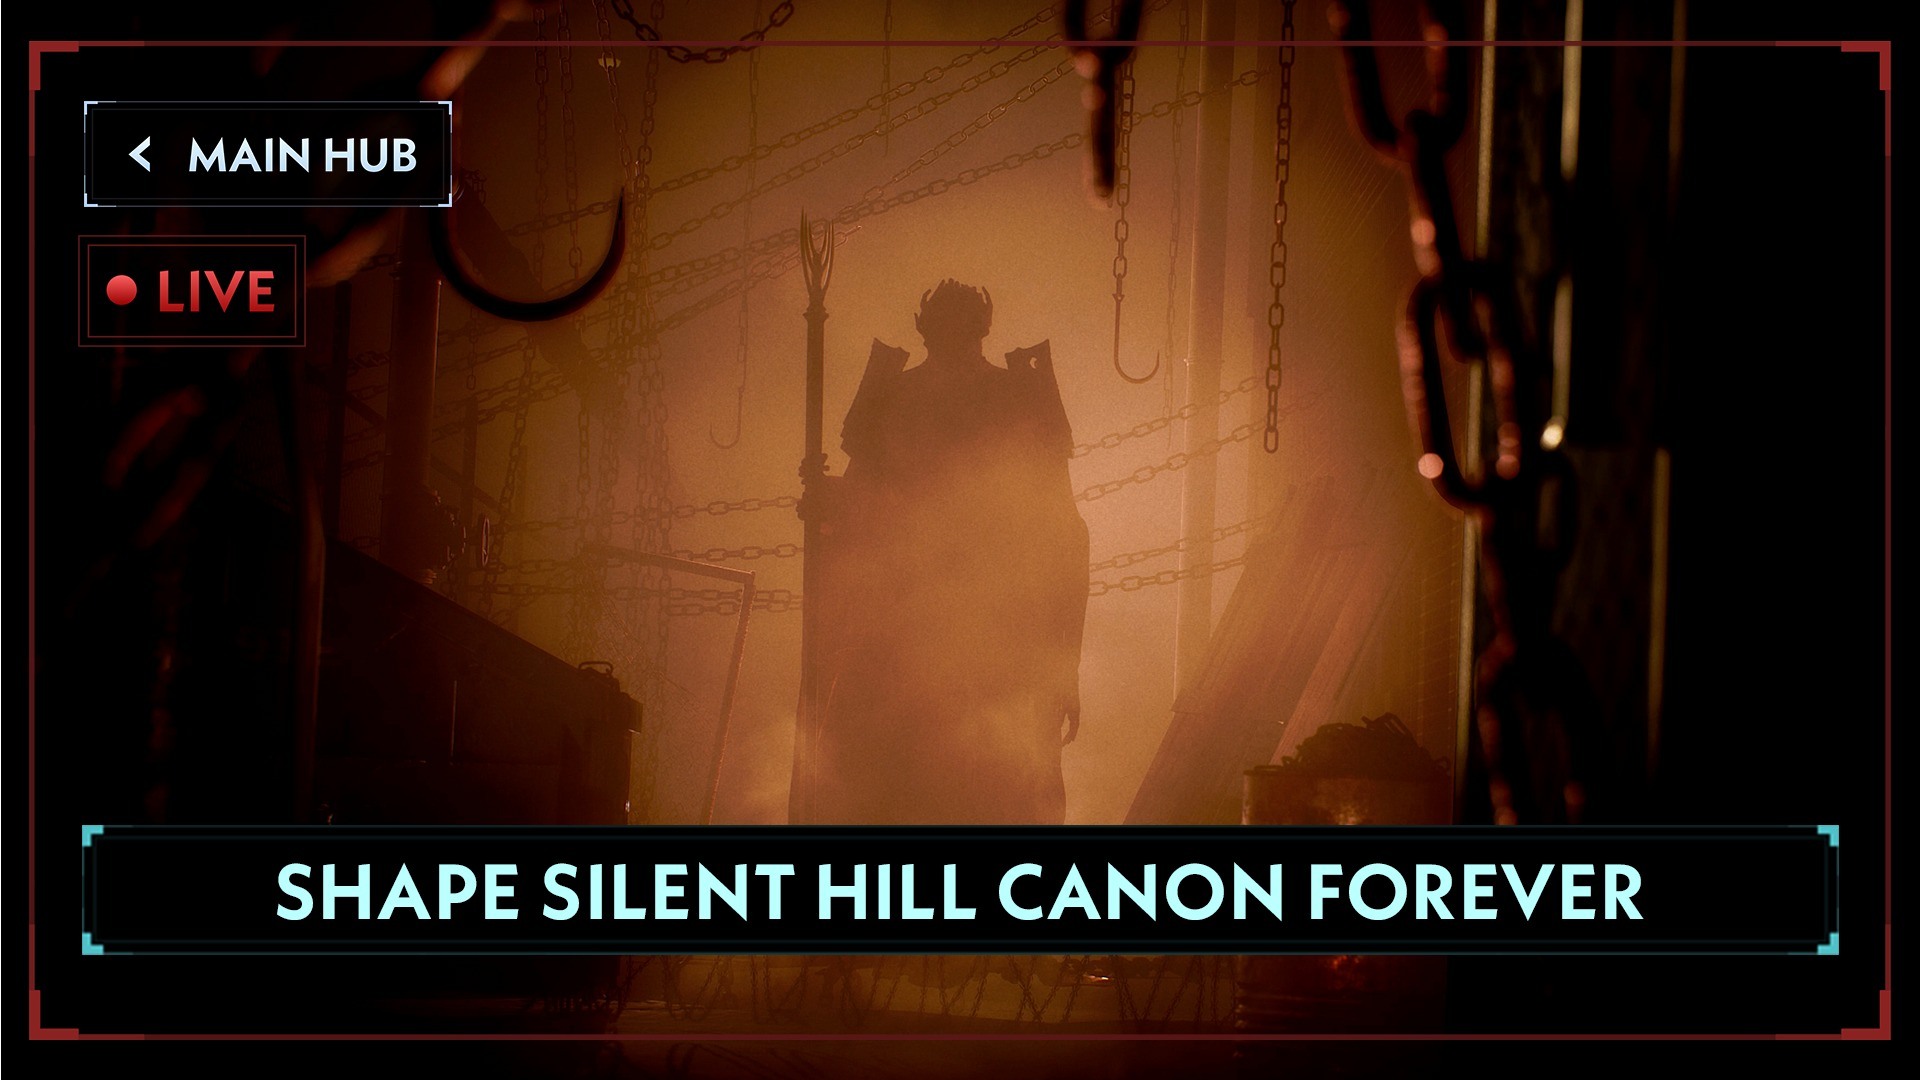 Silent Hill: Ascension gets new trailer and info ahead of global